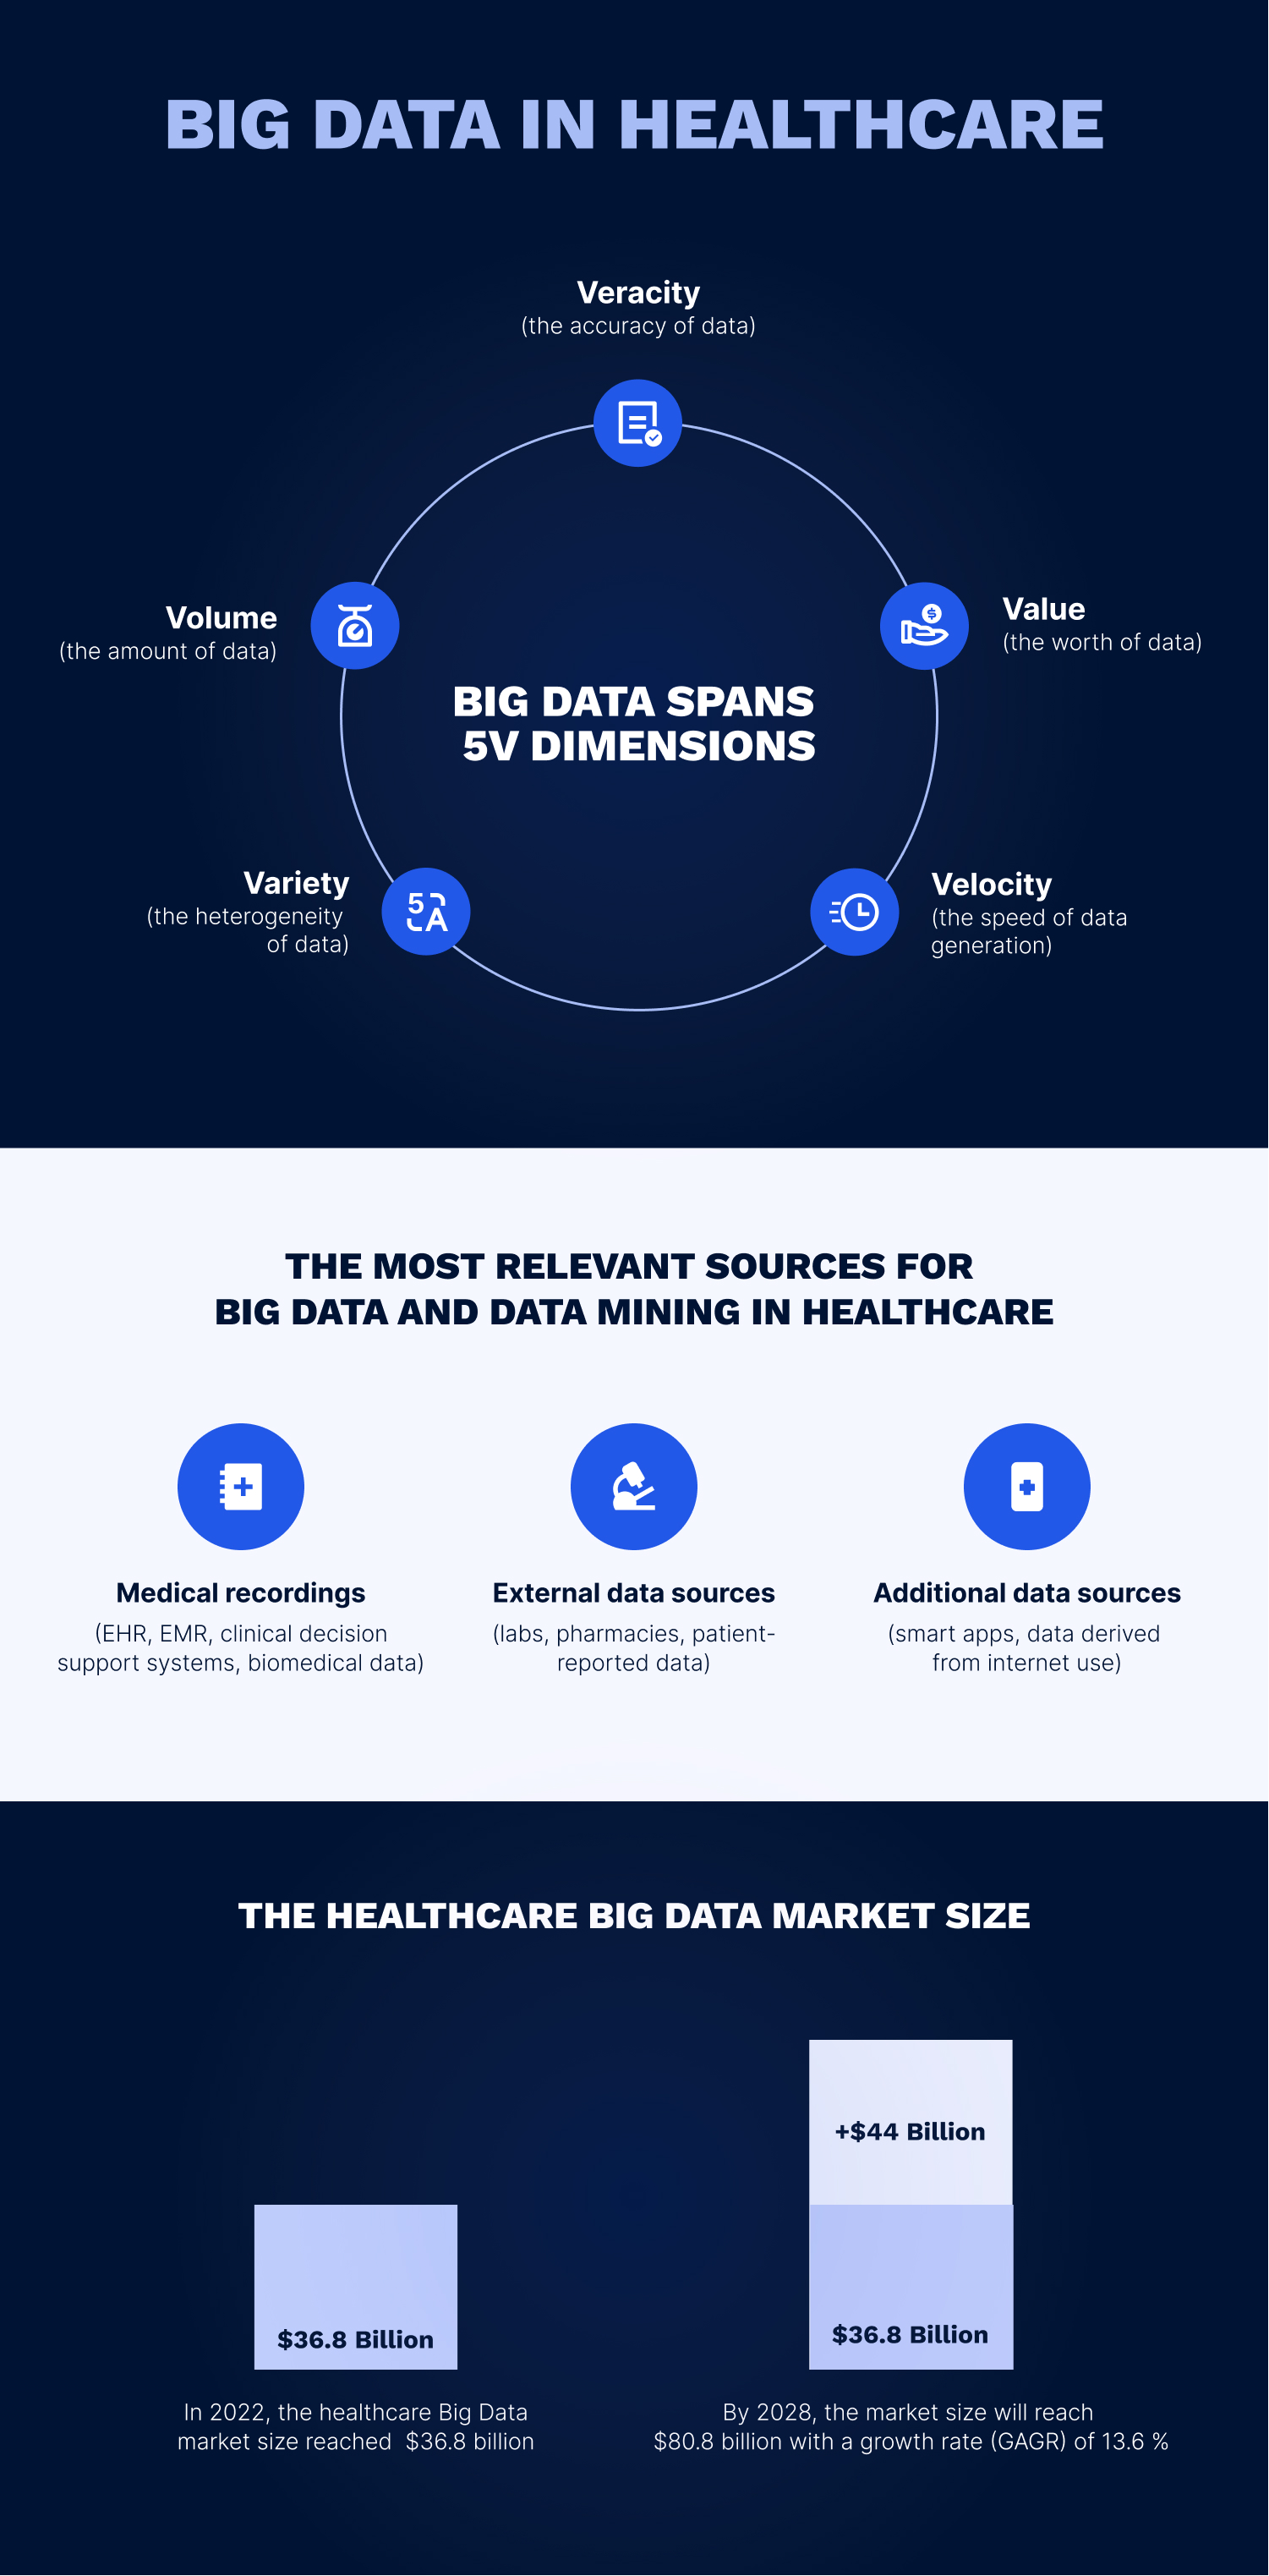 The impact of big data analytics on the healthcare industry